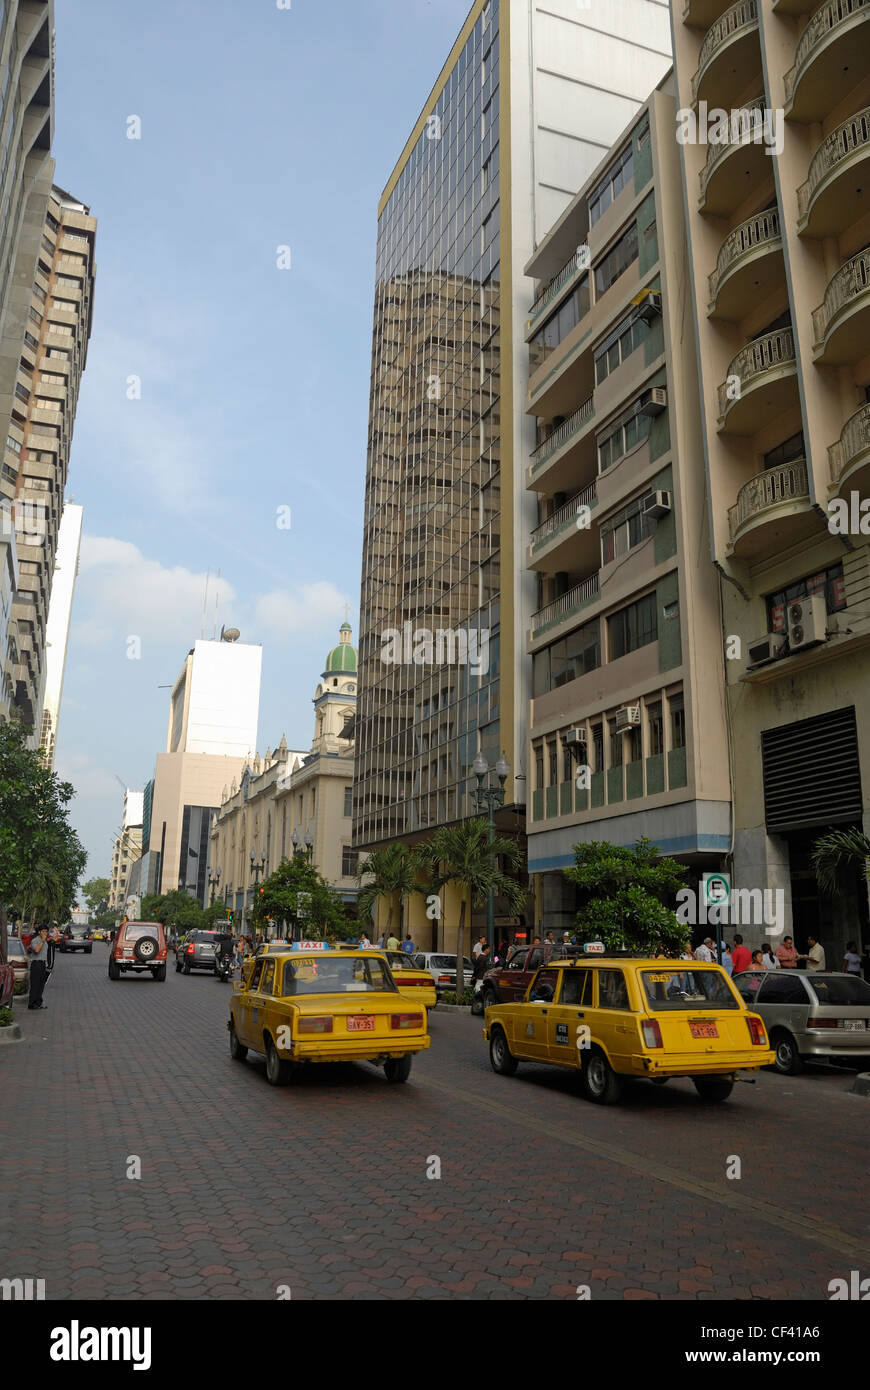 Guayaquil, Ecuador - Traffic and yellow taxis Stock Photo